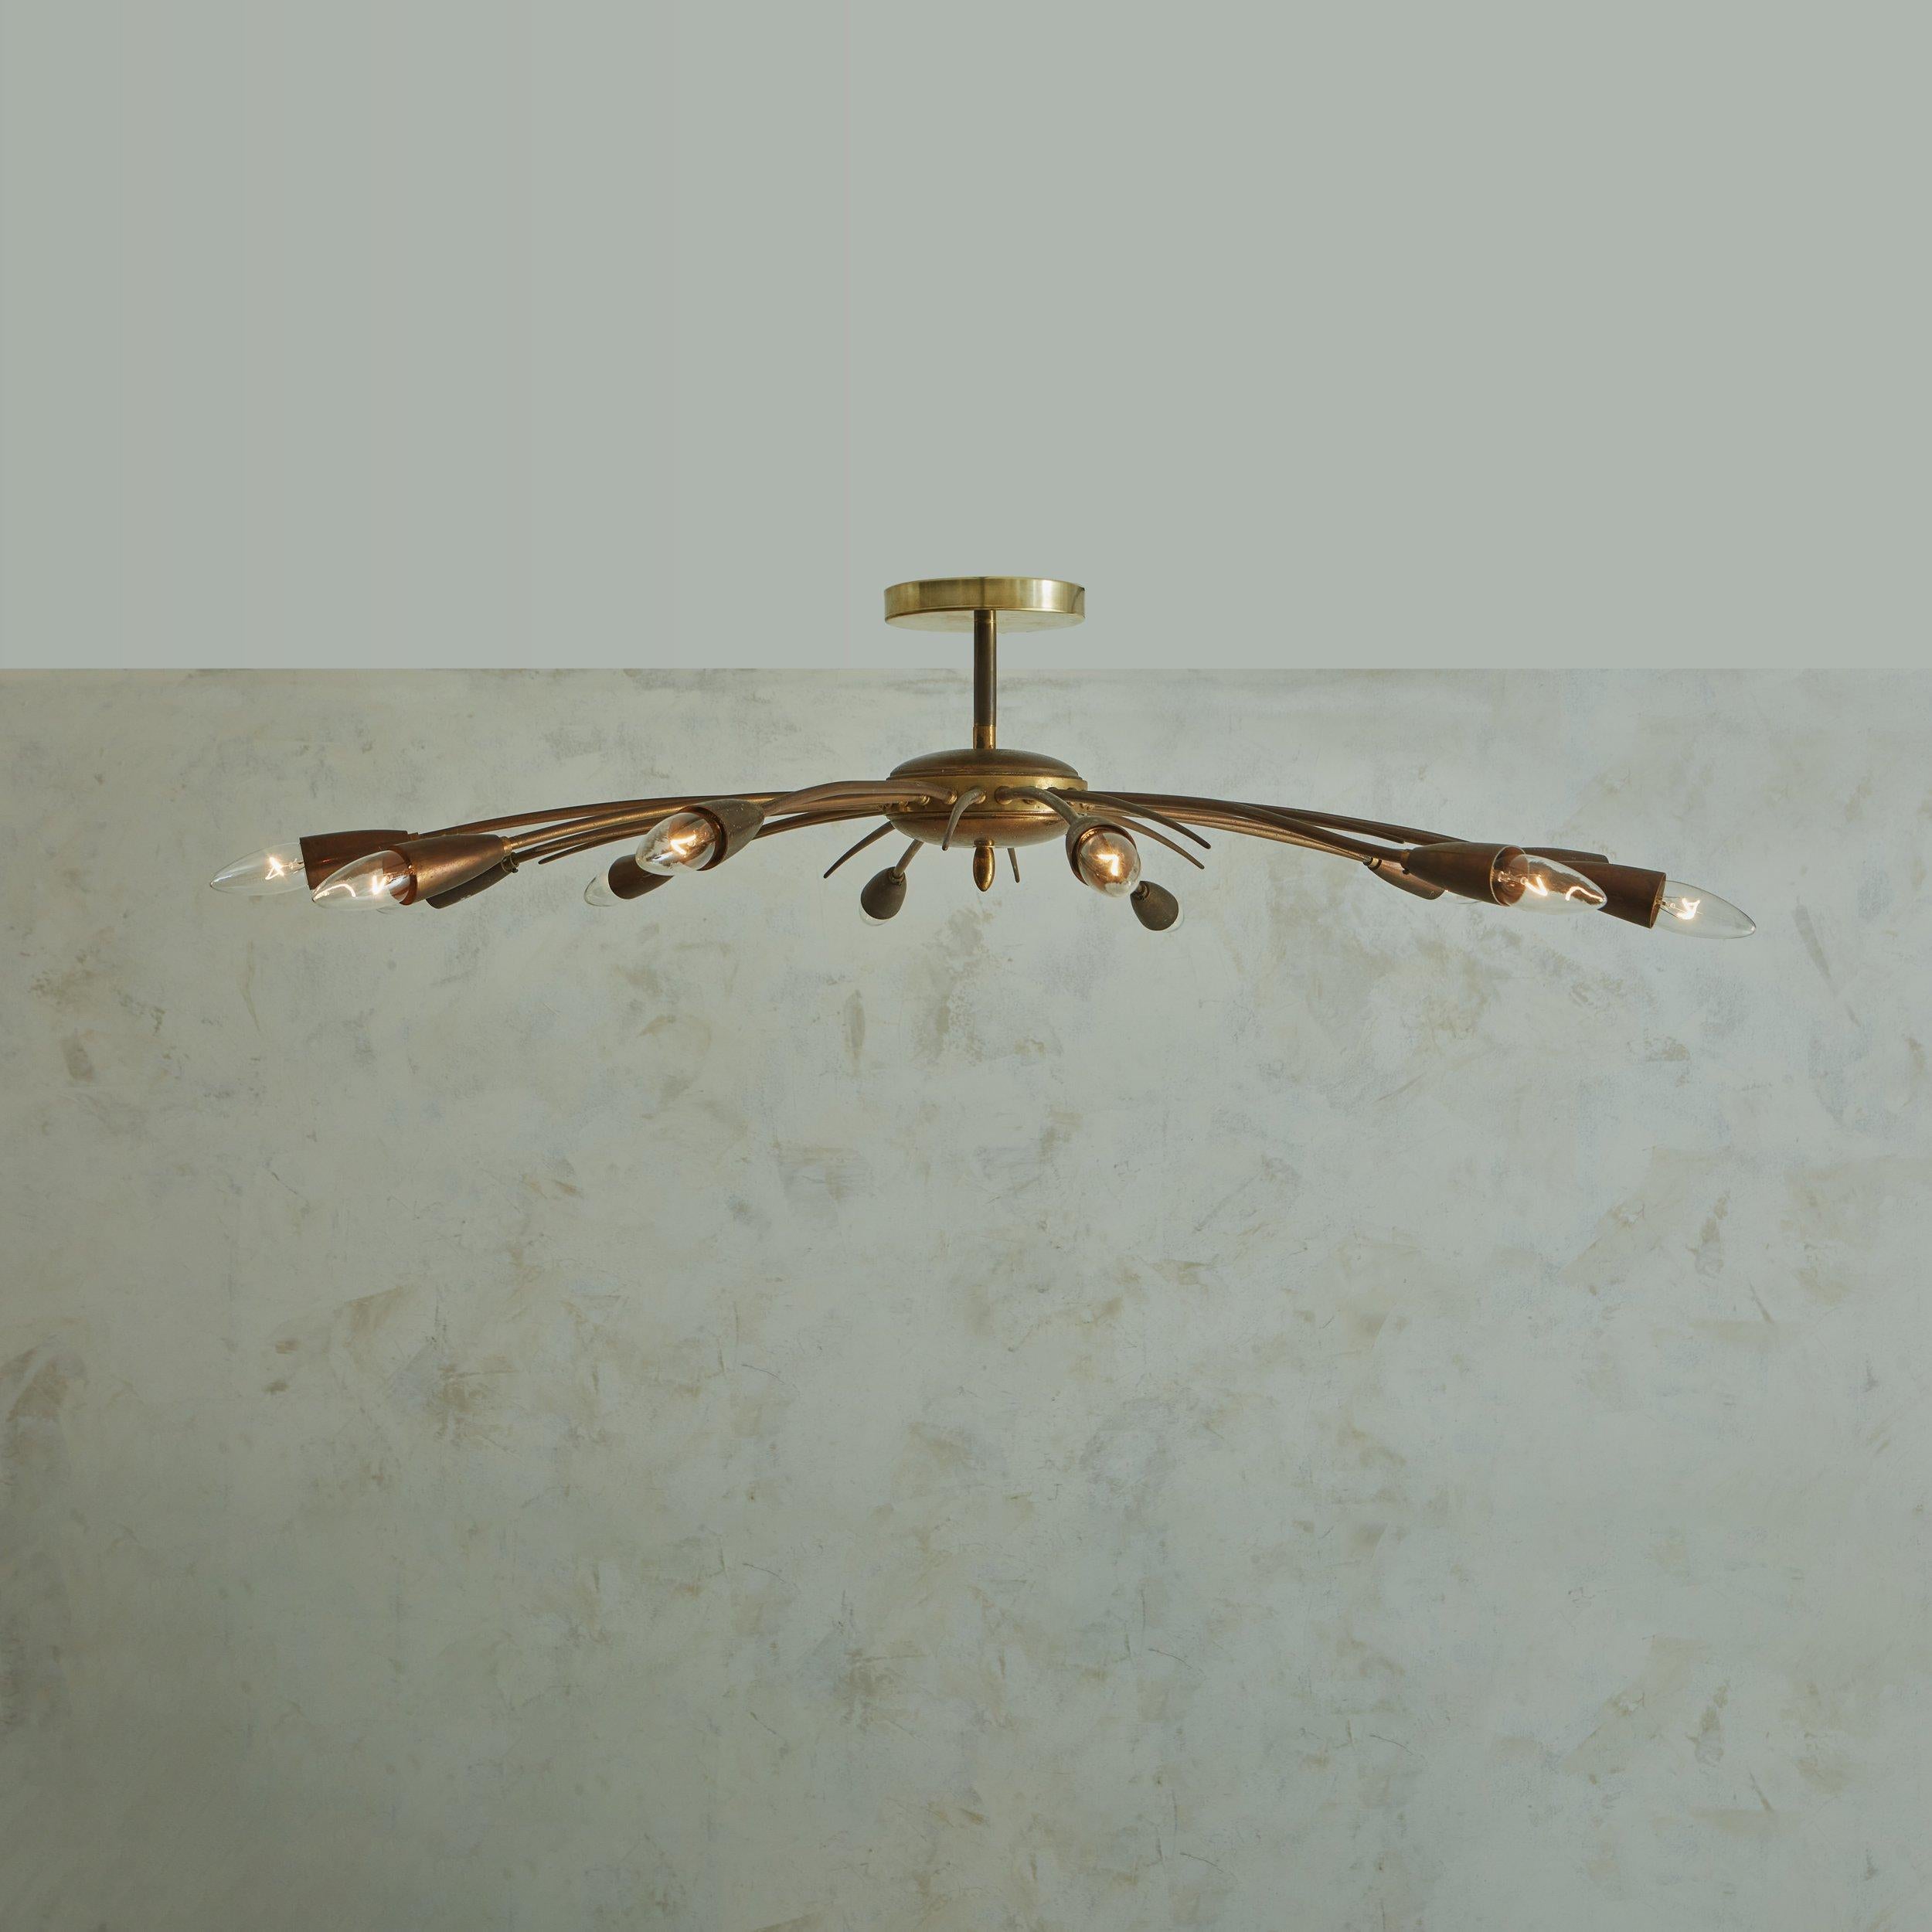 A 1960s Italian chandelier in the style of Stilnovo. This fixture was constructed with patinated brass and features 12 tubular arms, which sprout outwards from a central sphere with a bottom finial. 12 additional shorter decorative tines sprout in